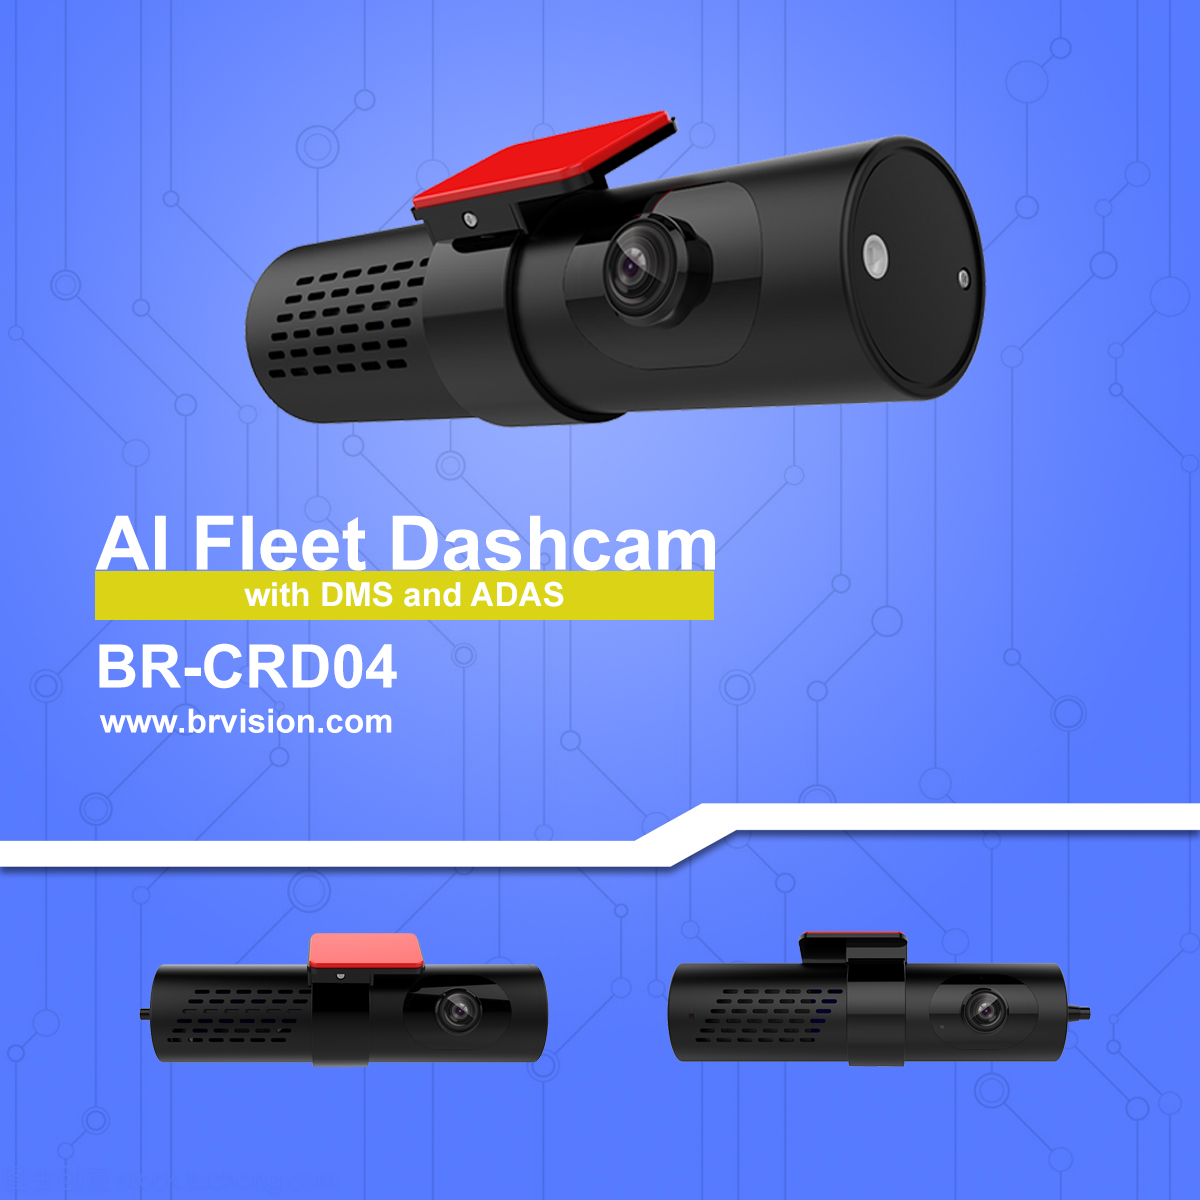 New Generation of AI Dashcam with ADAS and DMS Was Born